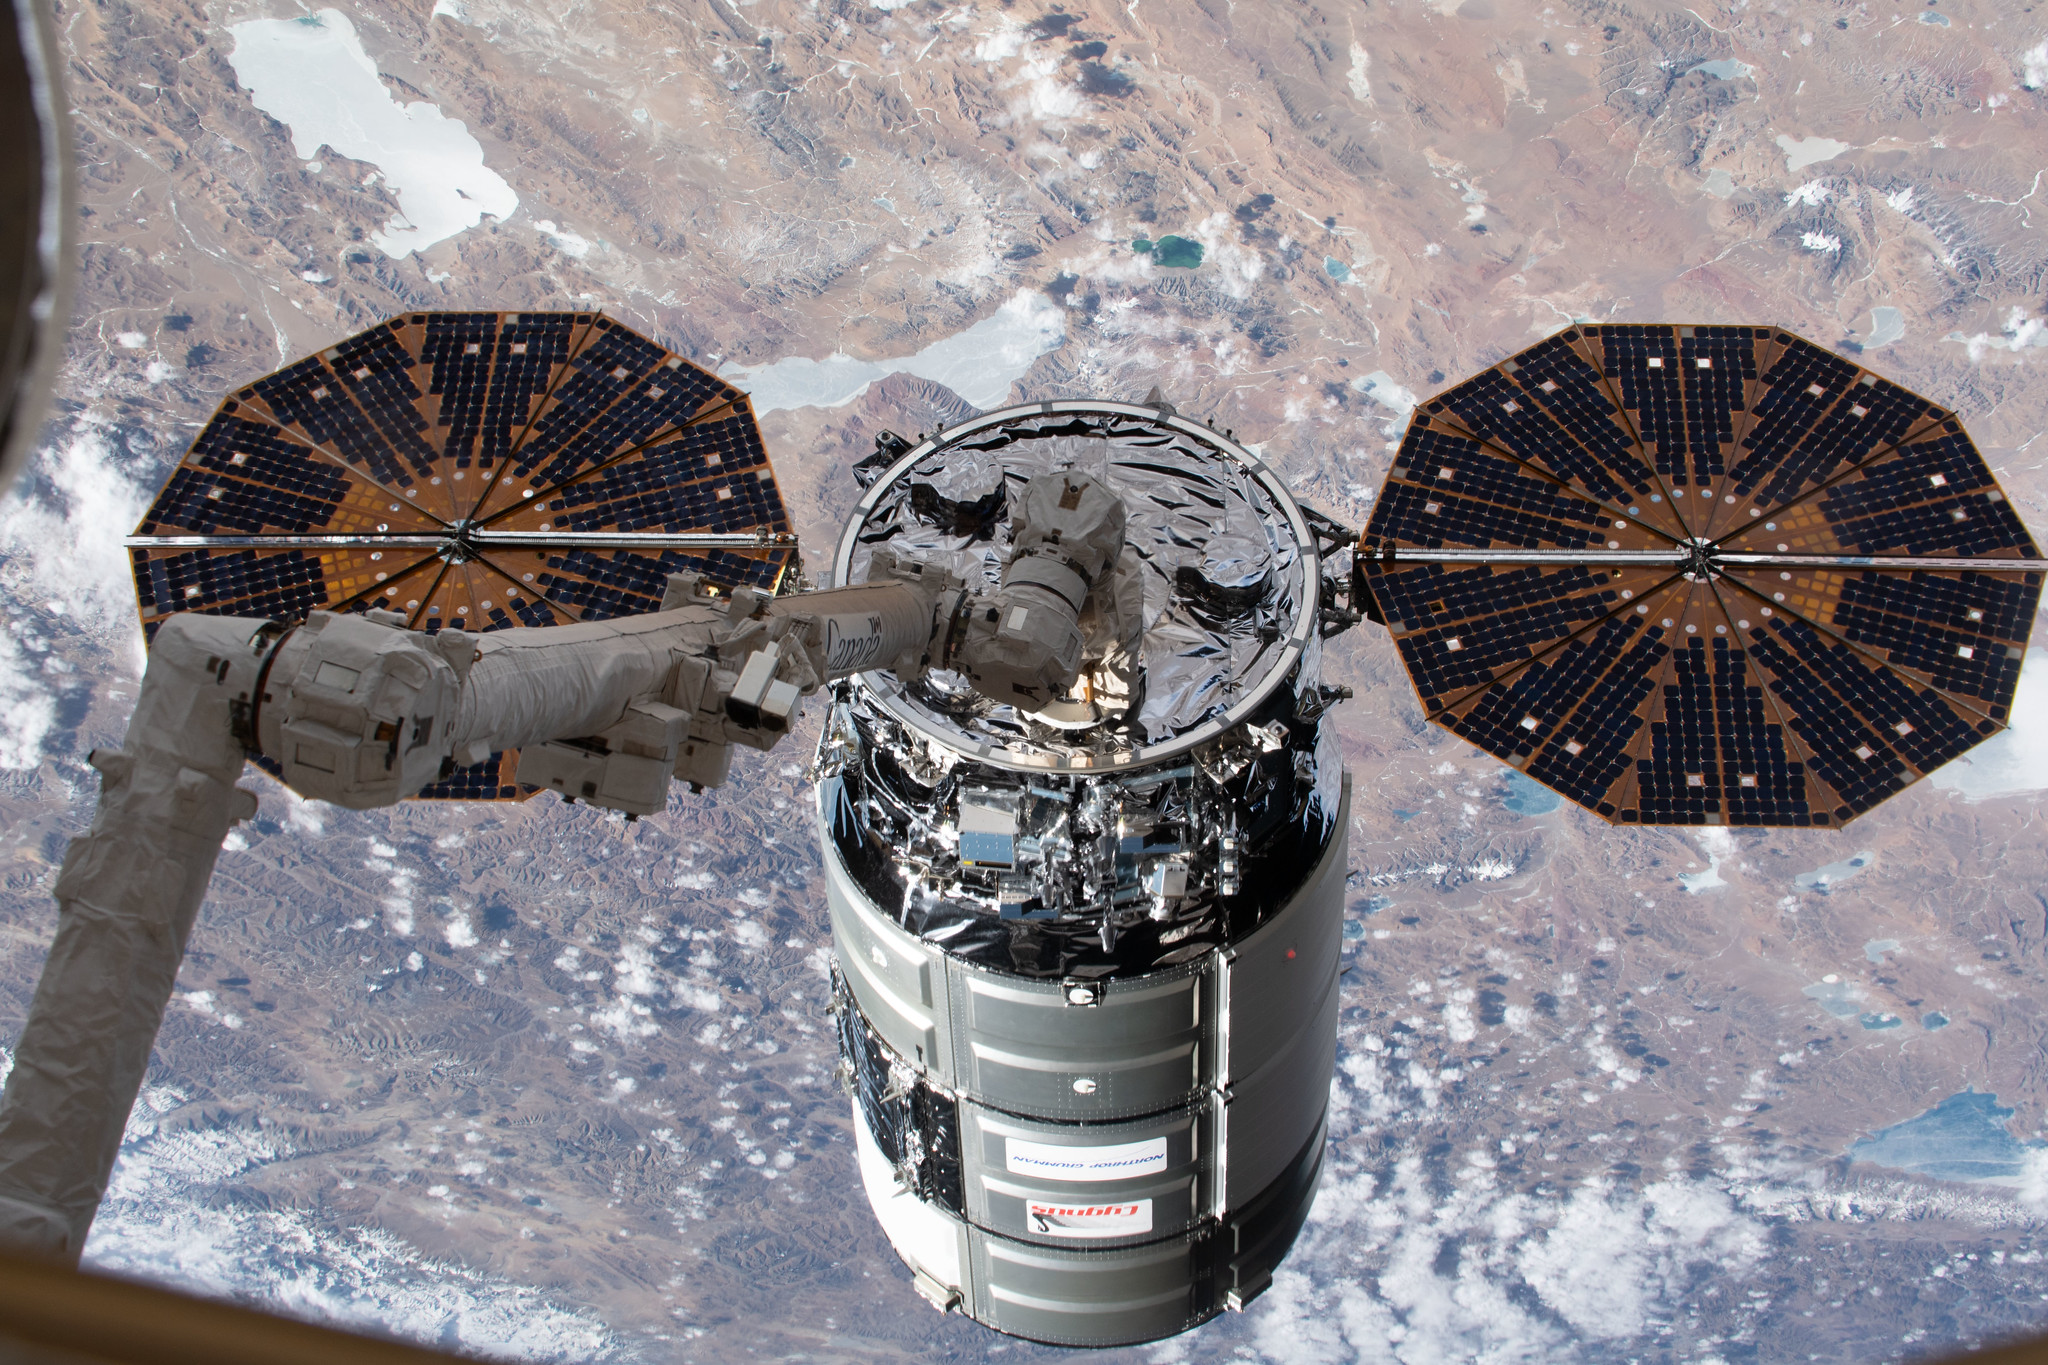 An image of Northrop Grumman’s Cygnus spacecraft in the grips of the Canadarm2 robotic arm shortly after being captured at the International Space Station